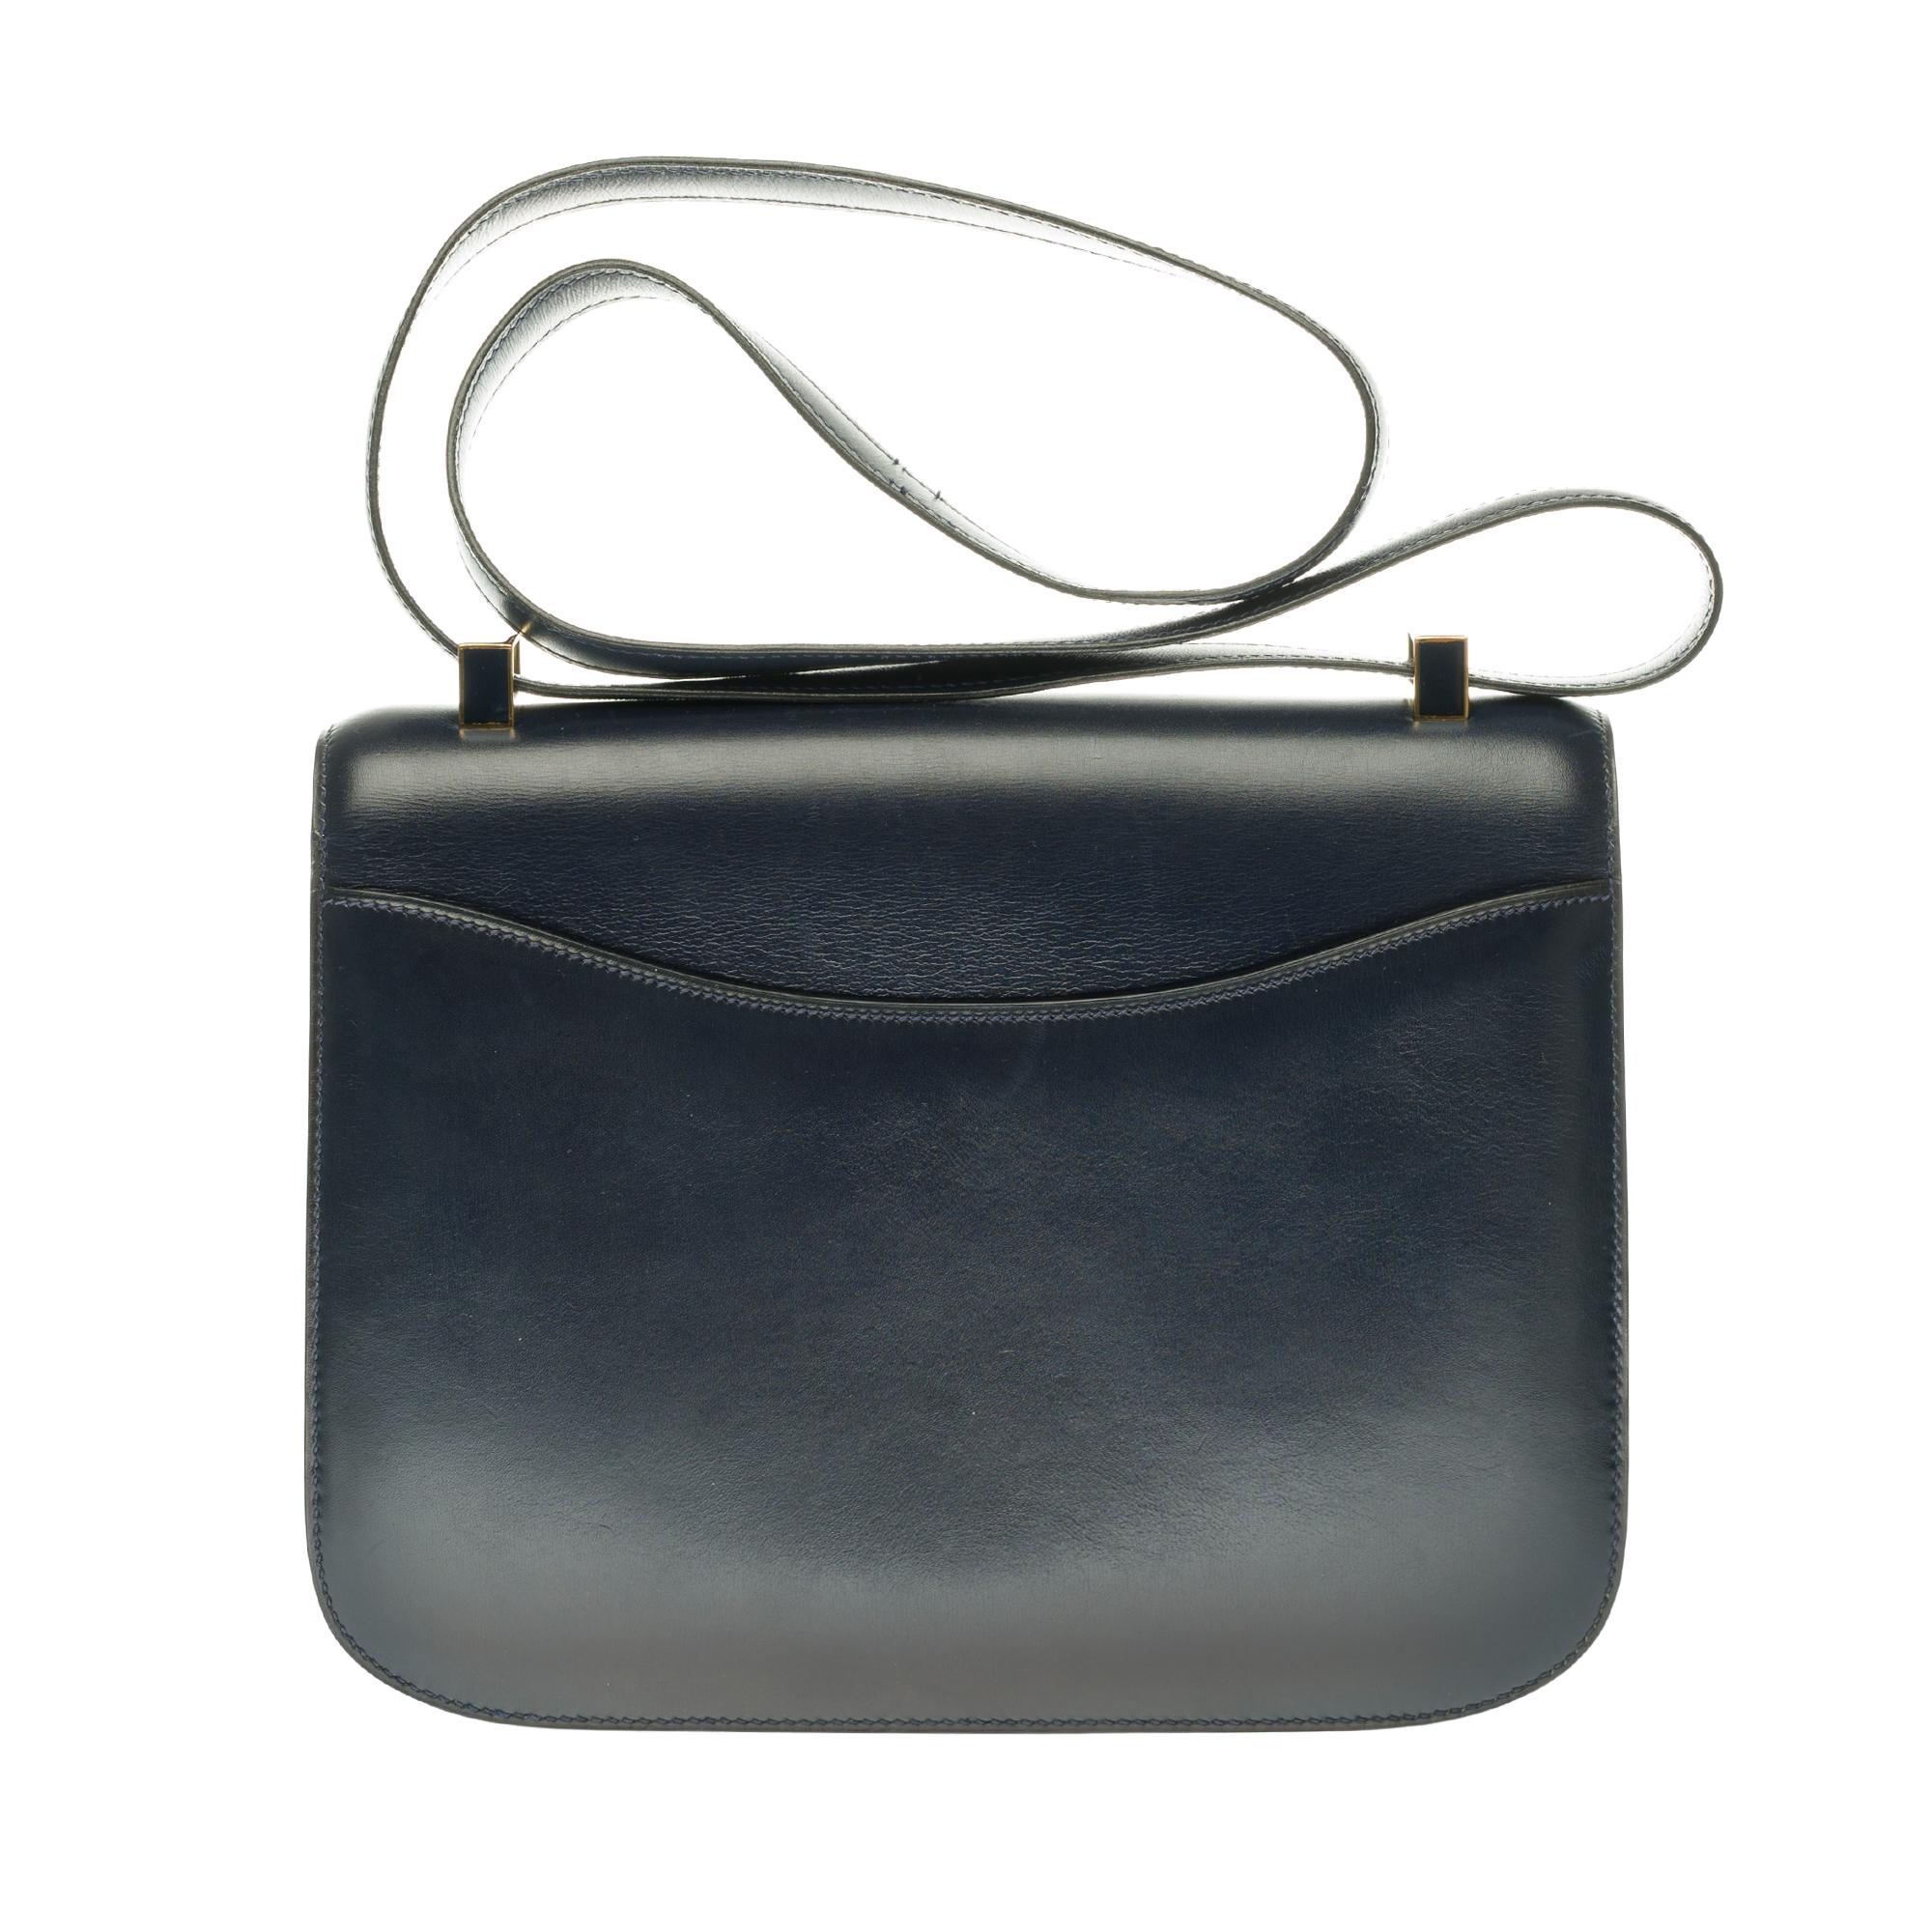 Splendid & Rare Hermes Constance 23 cm handbag in navy blue box, gold metal hardware and enamel , transformable handle in navy leather allowing a hand or shoulder support.

Closure with H buckle in marine enamel (limited edition) on flap.
A patch